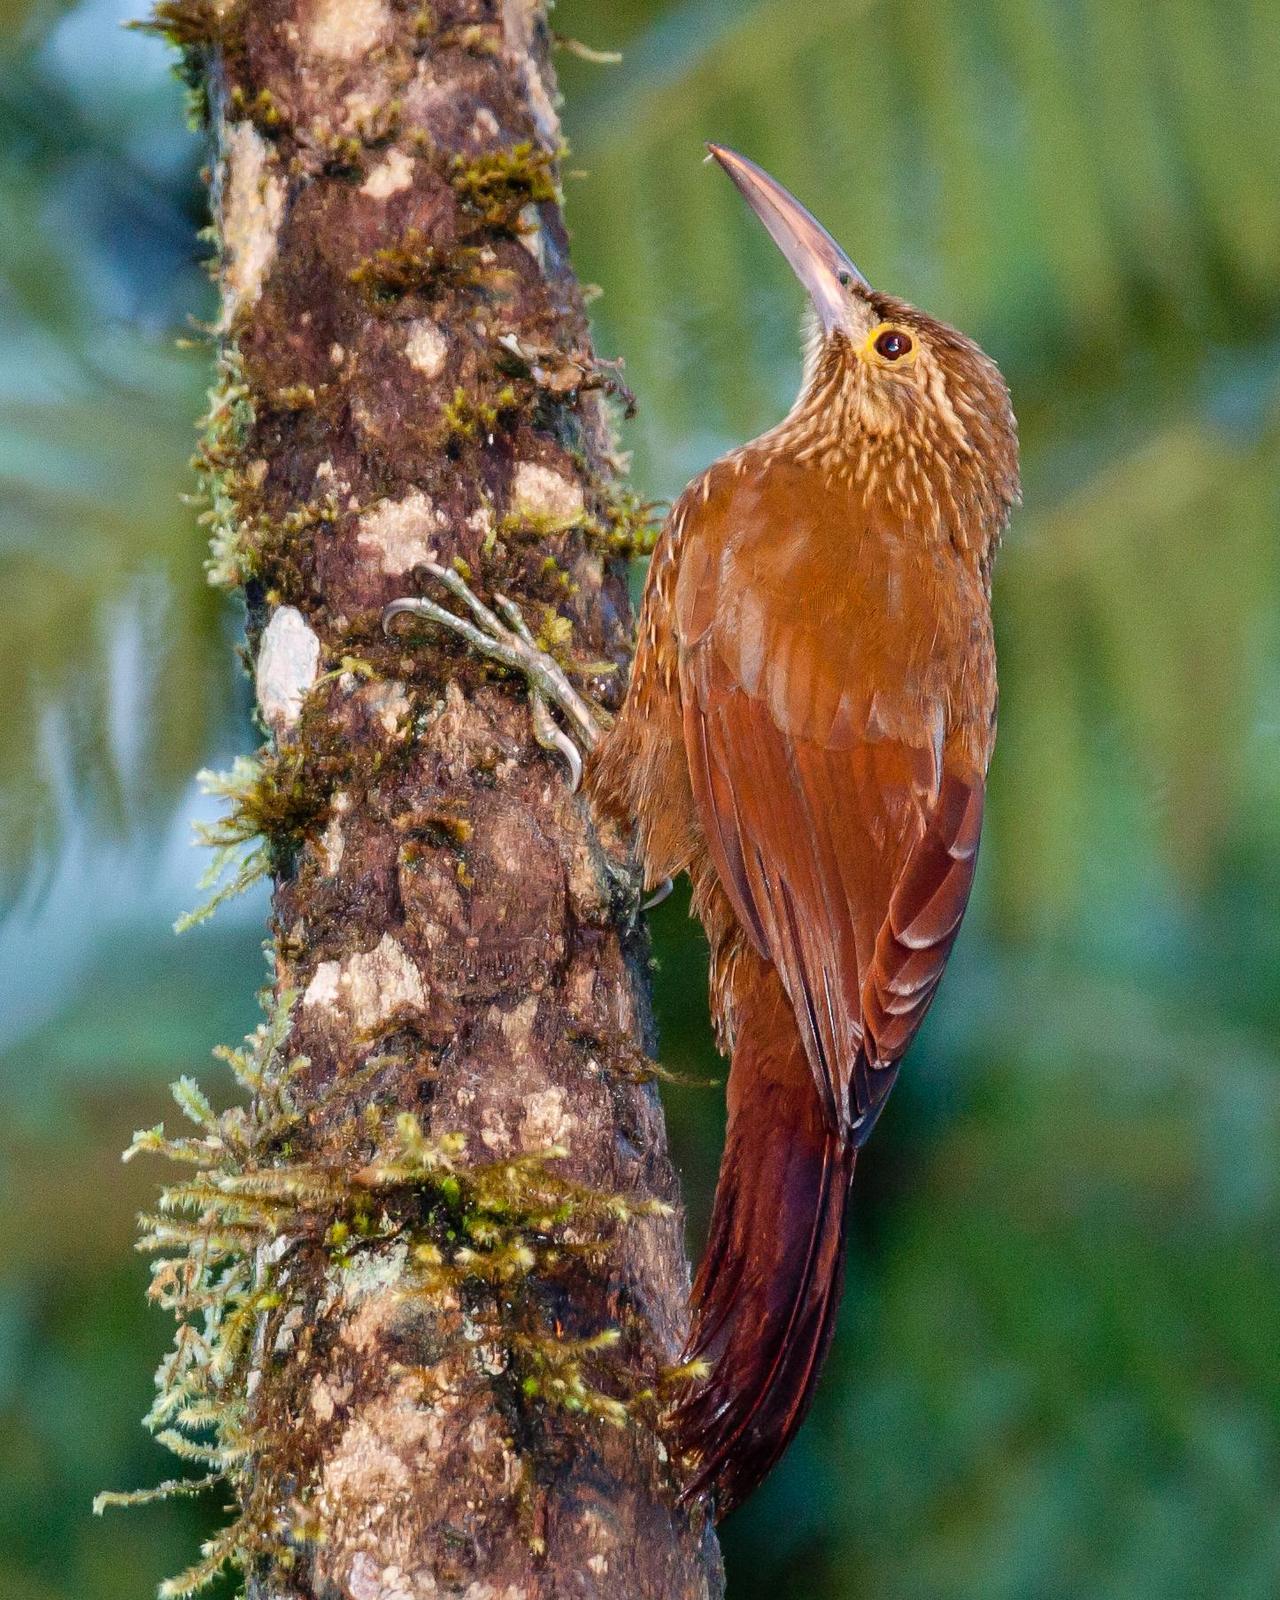 Strong-billed Woodcreeper Photo by Robert Lewis